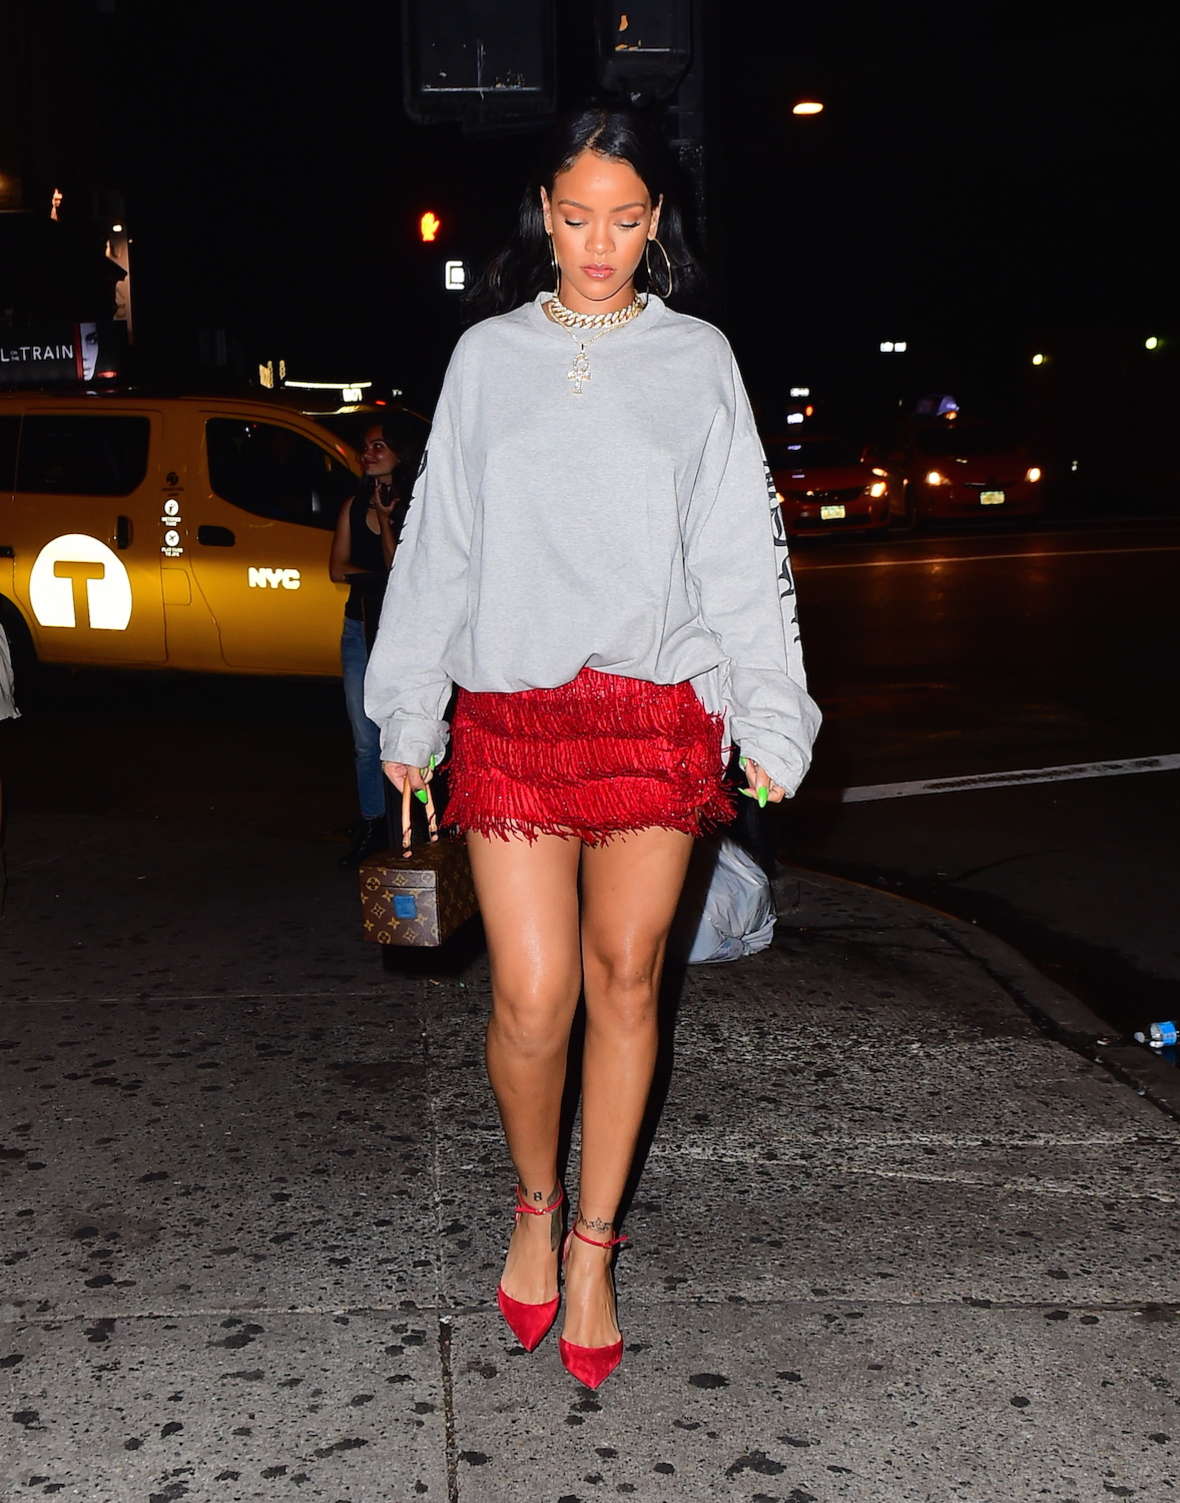 Rihanna in a red fringed skirt at Avenue Nightclub in NY